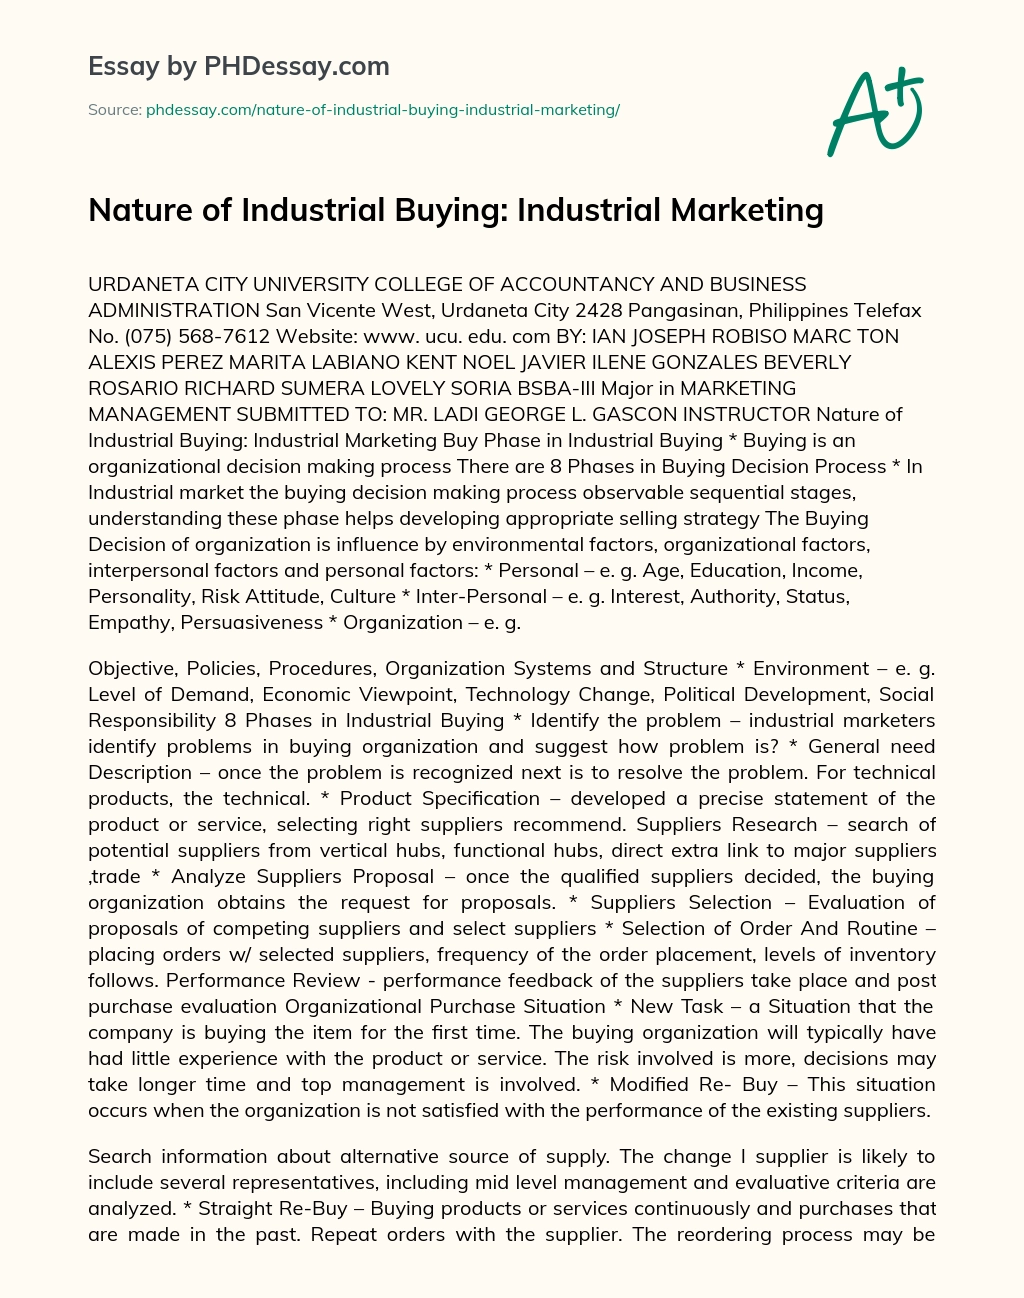 Nature of Industrial Buying: Industrial Marketing essay